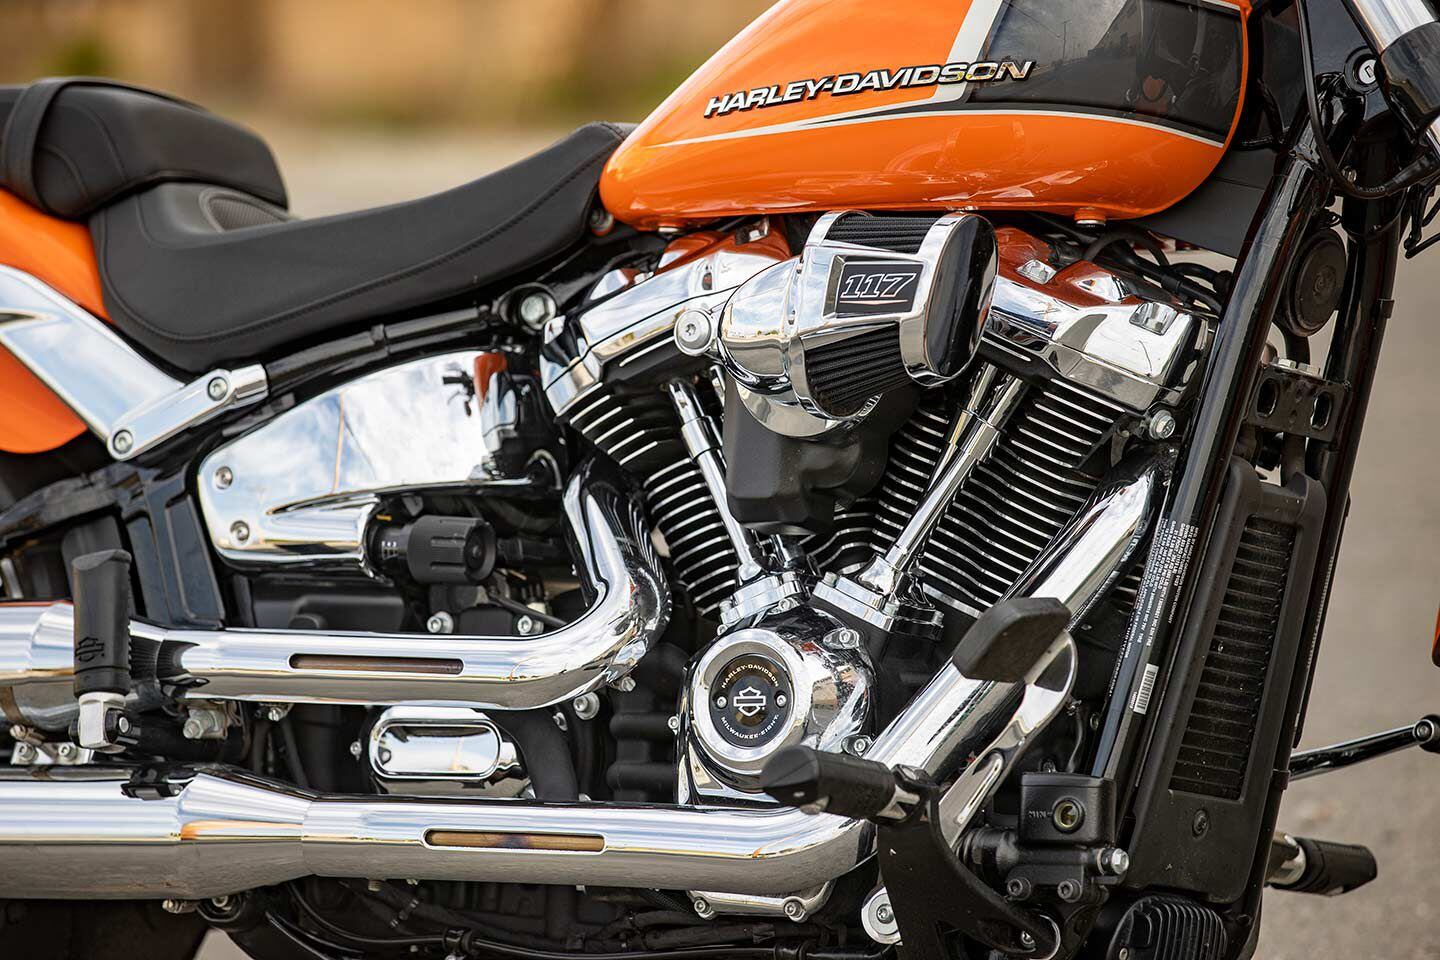 The largest engine currently offered in standard production H-D models is the Milwaukee-Eight 117.